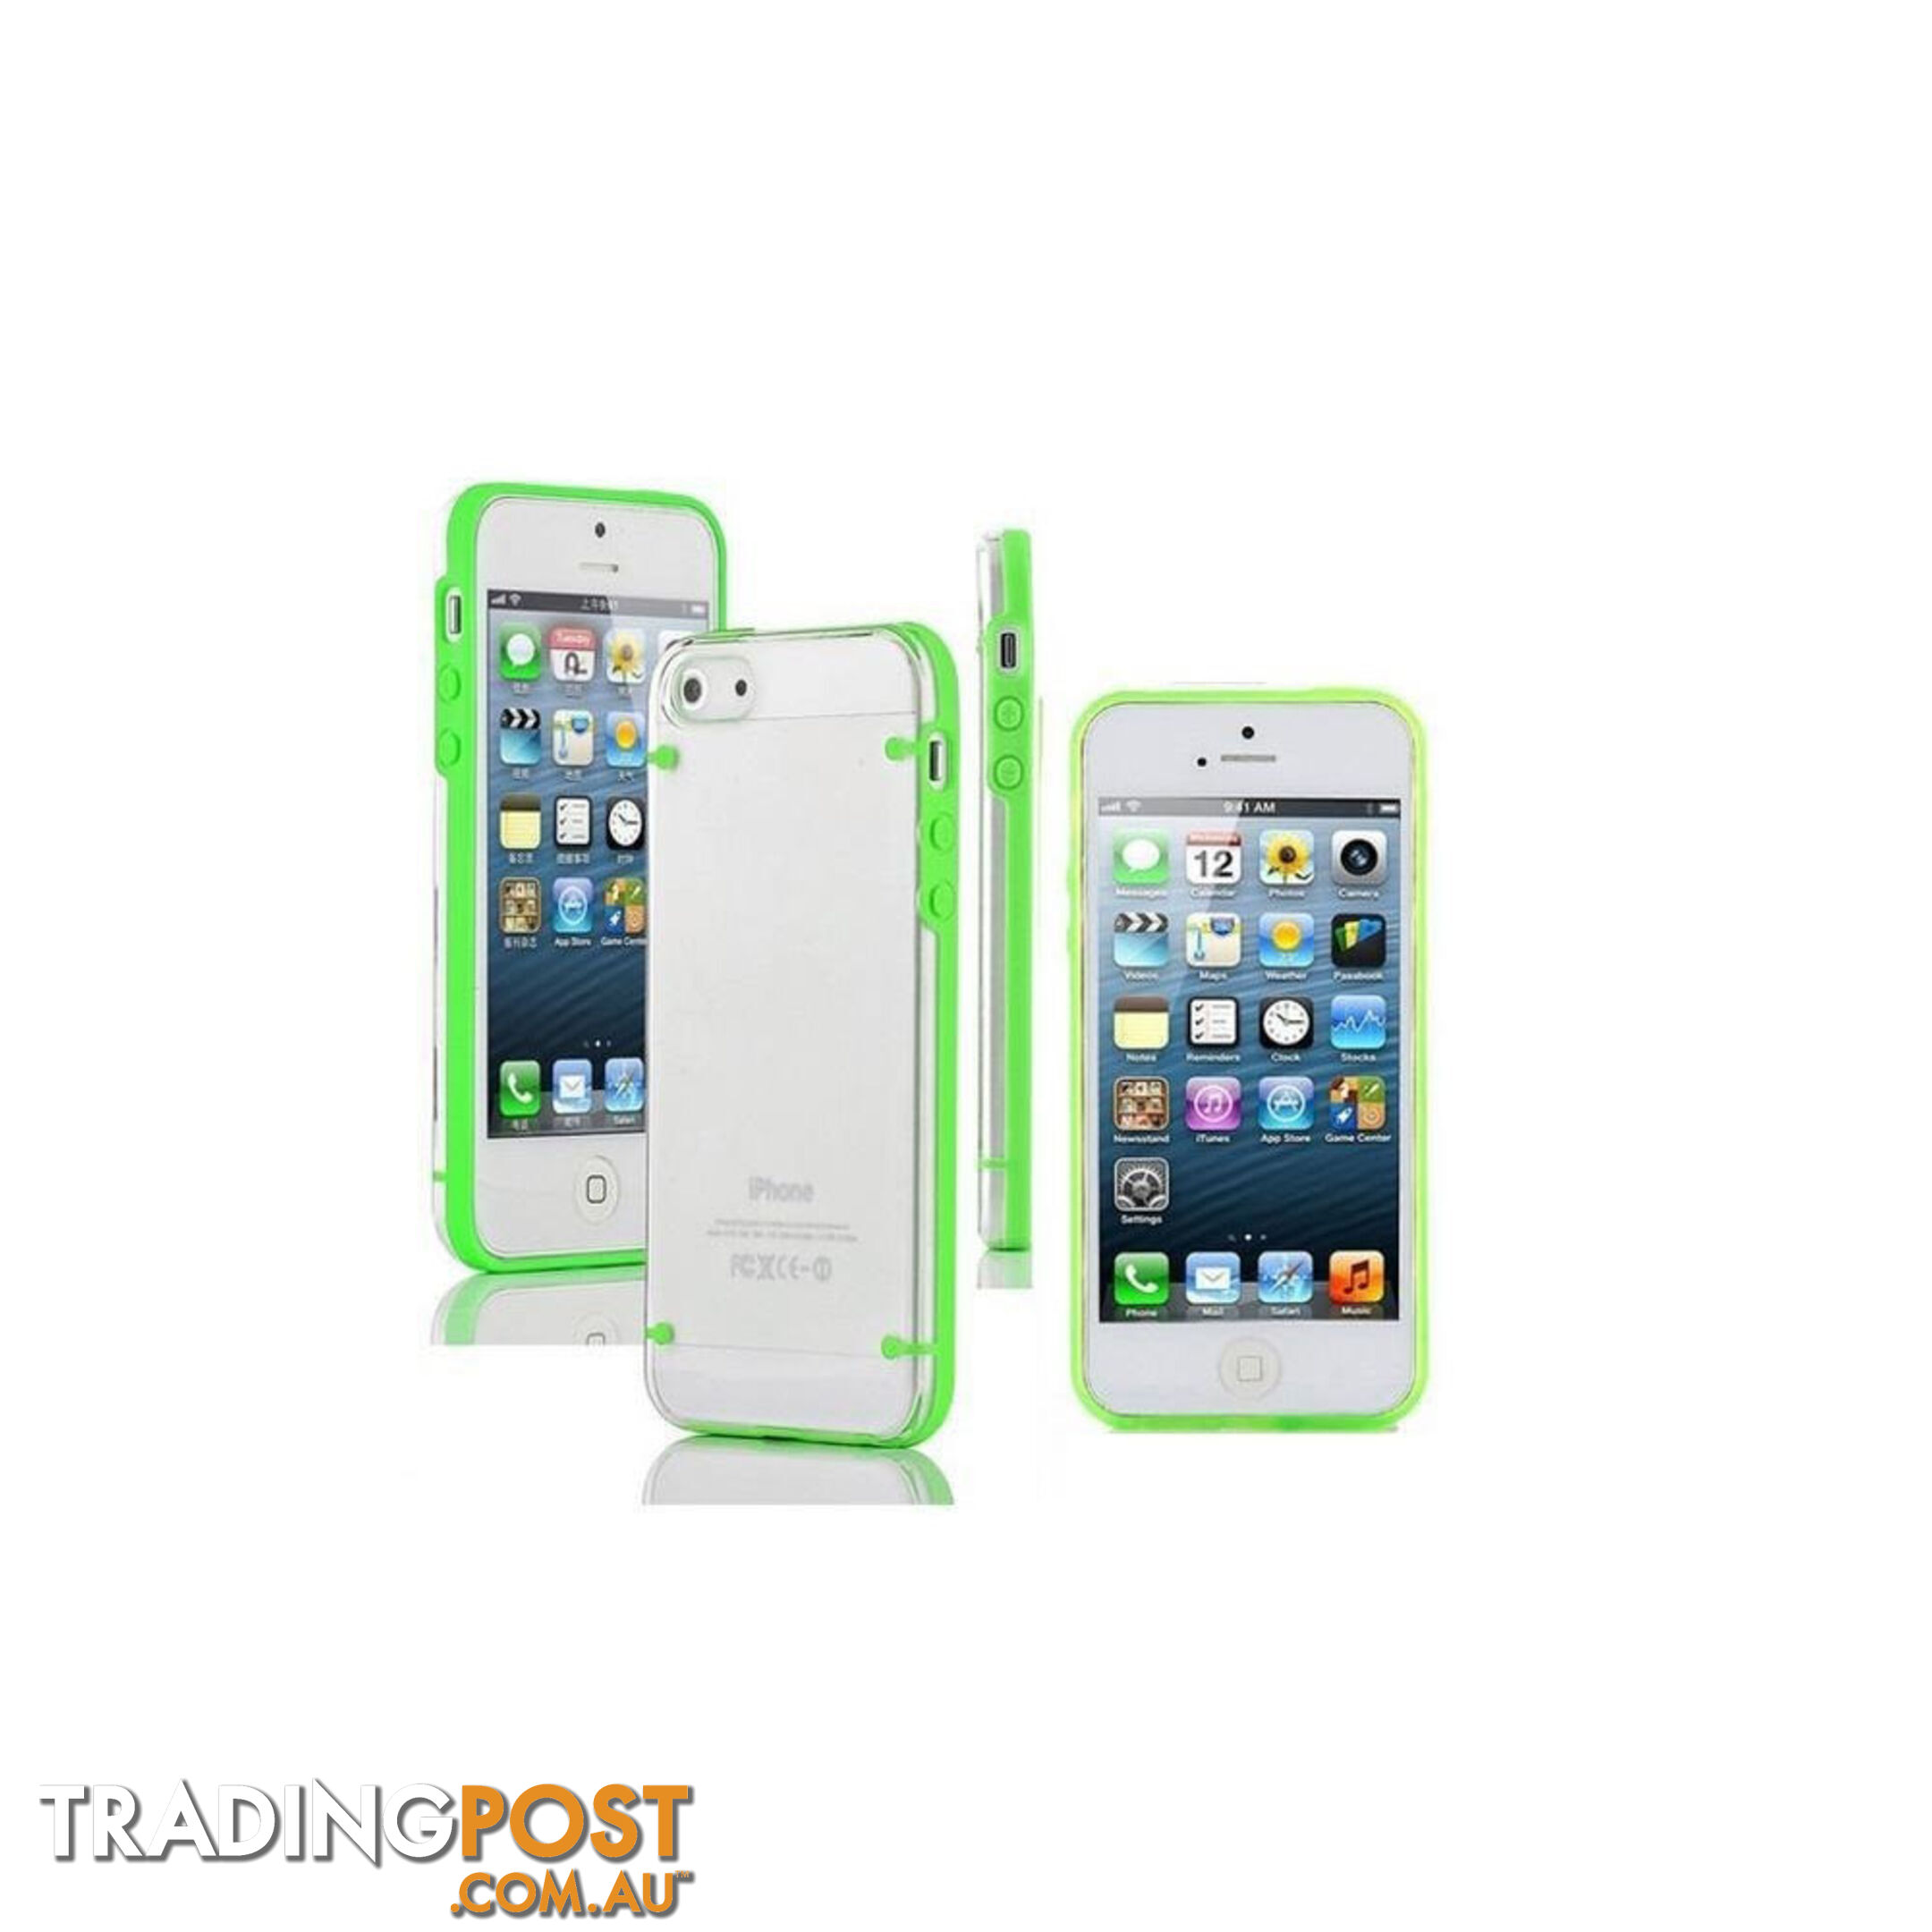 Clear Transparent Hard Case Cover Accessories Green For iPhone 6 Plus 5.5 inch